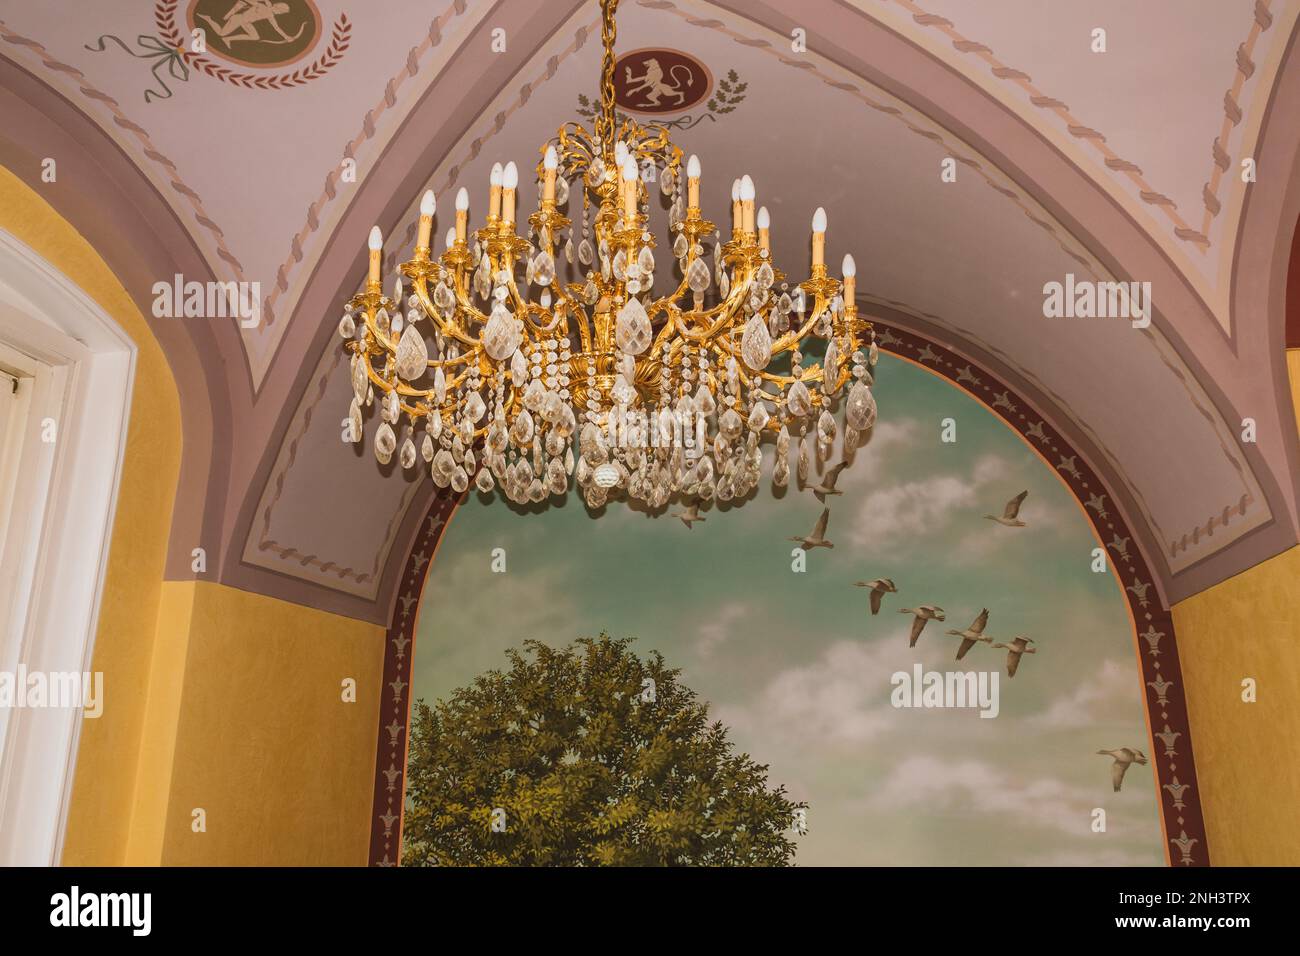 The interior spaces and furnishings of Acsaújlaky Castle or Patay Castle evoke the world of luxury, elegance and aristocratic lifestyle, Acsa, Hungary Stock Photo